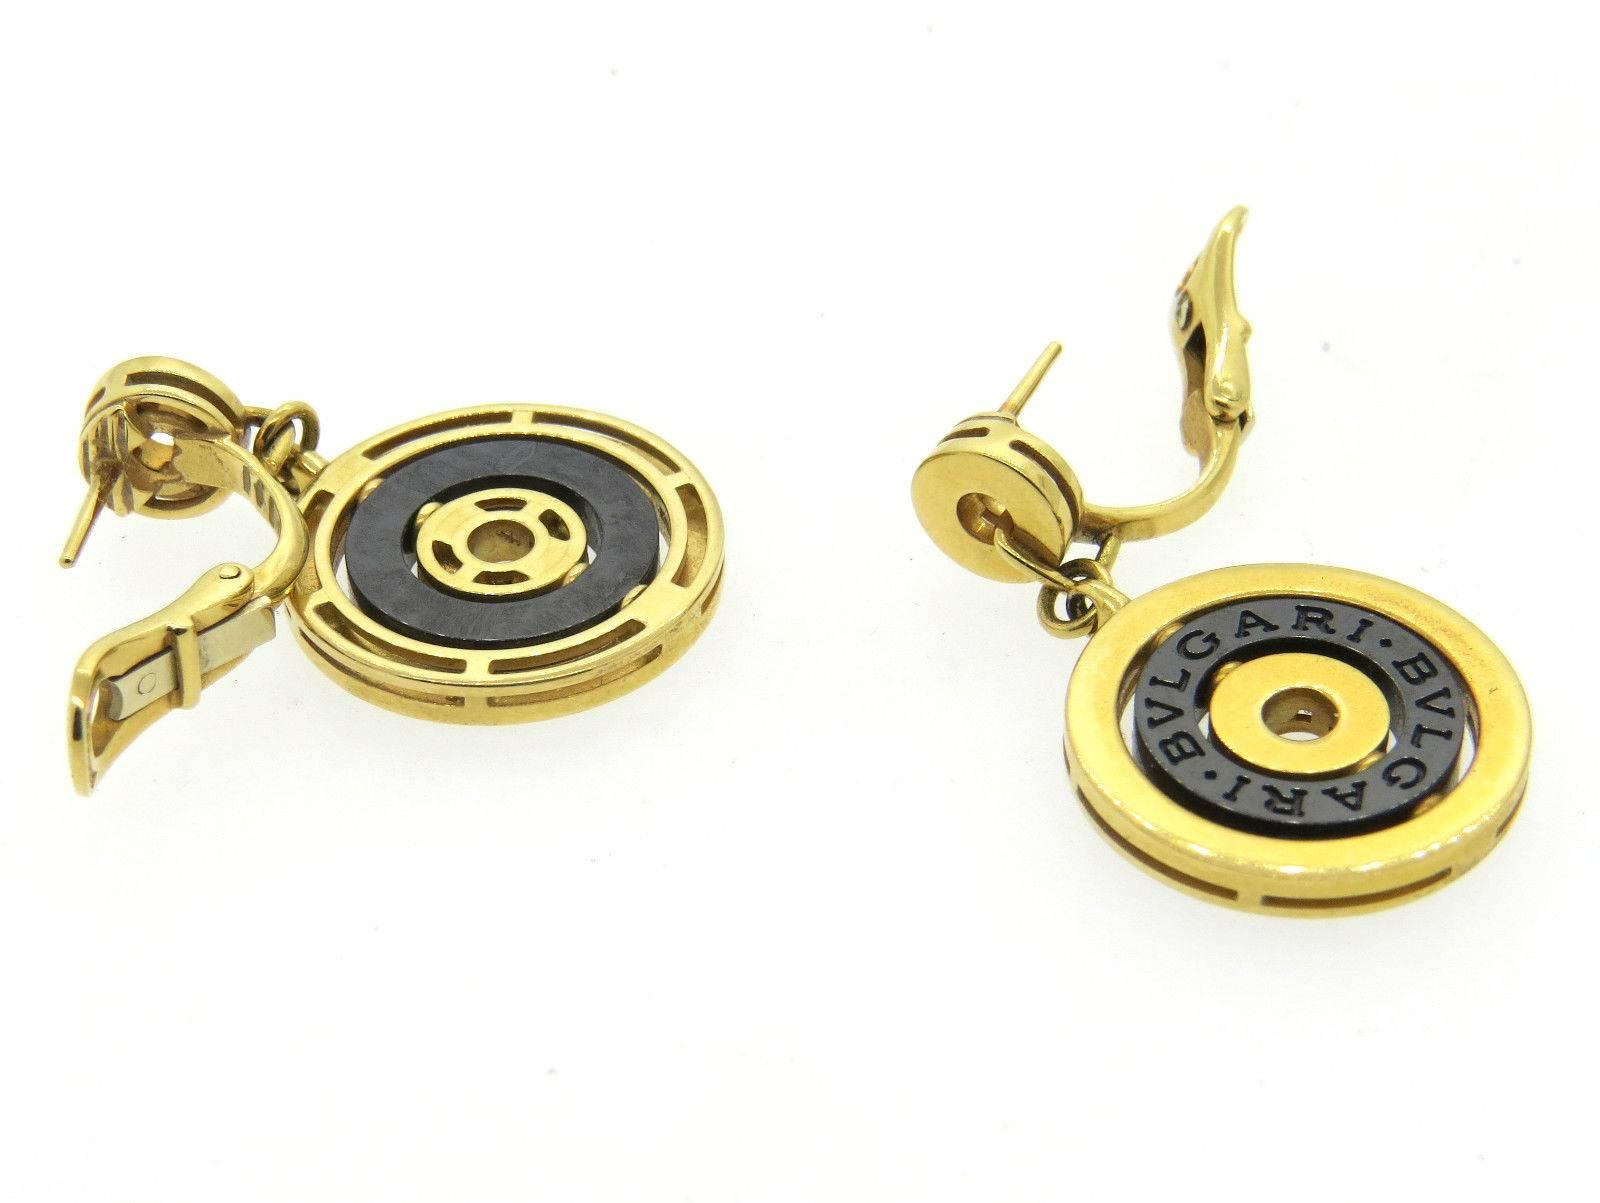 A pair of 18k yellow gold and black ceramic.  Crafted by Bulgari, the earrings are 35mm long x 21mm wide.  Marked: Bvlgari, 750, made in Italy.  The weight of the earrings is 21.7 grams.